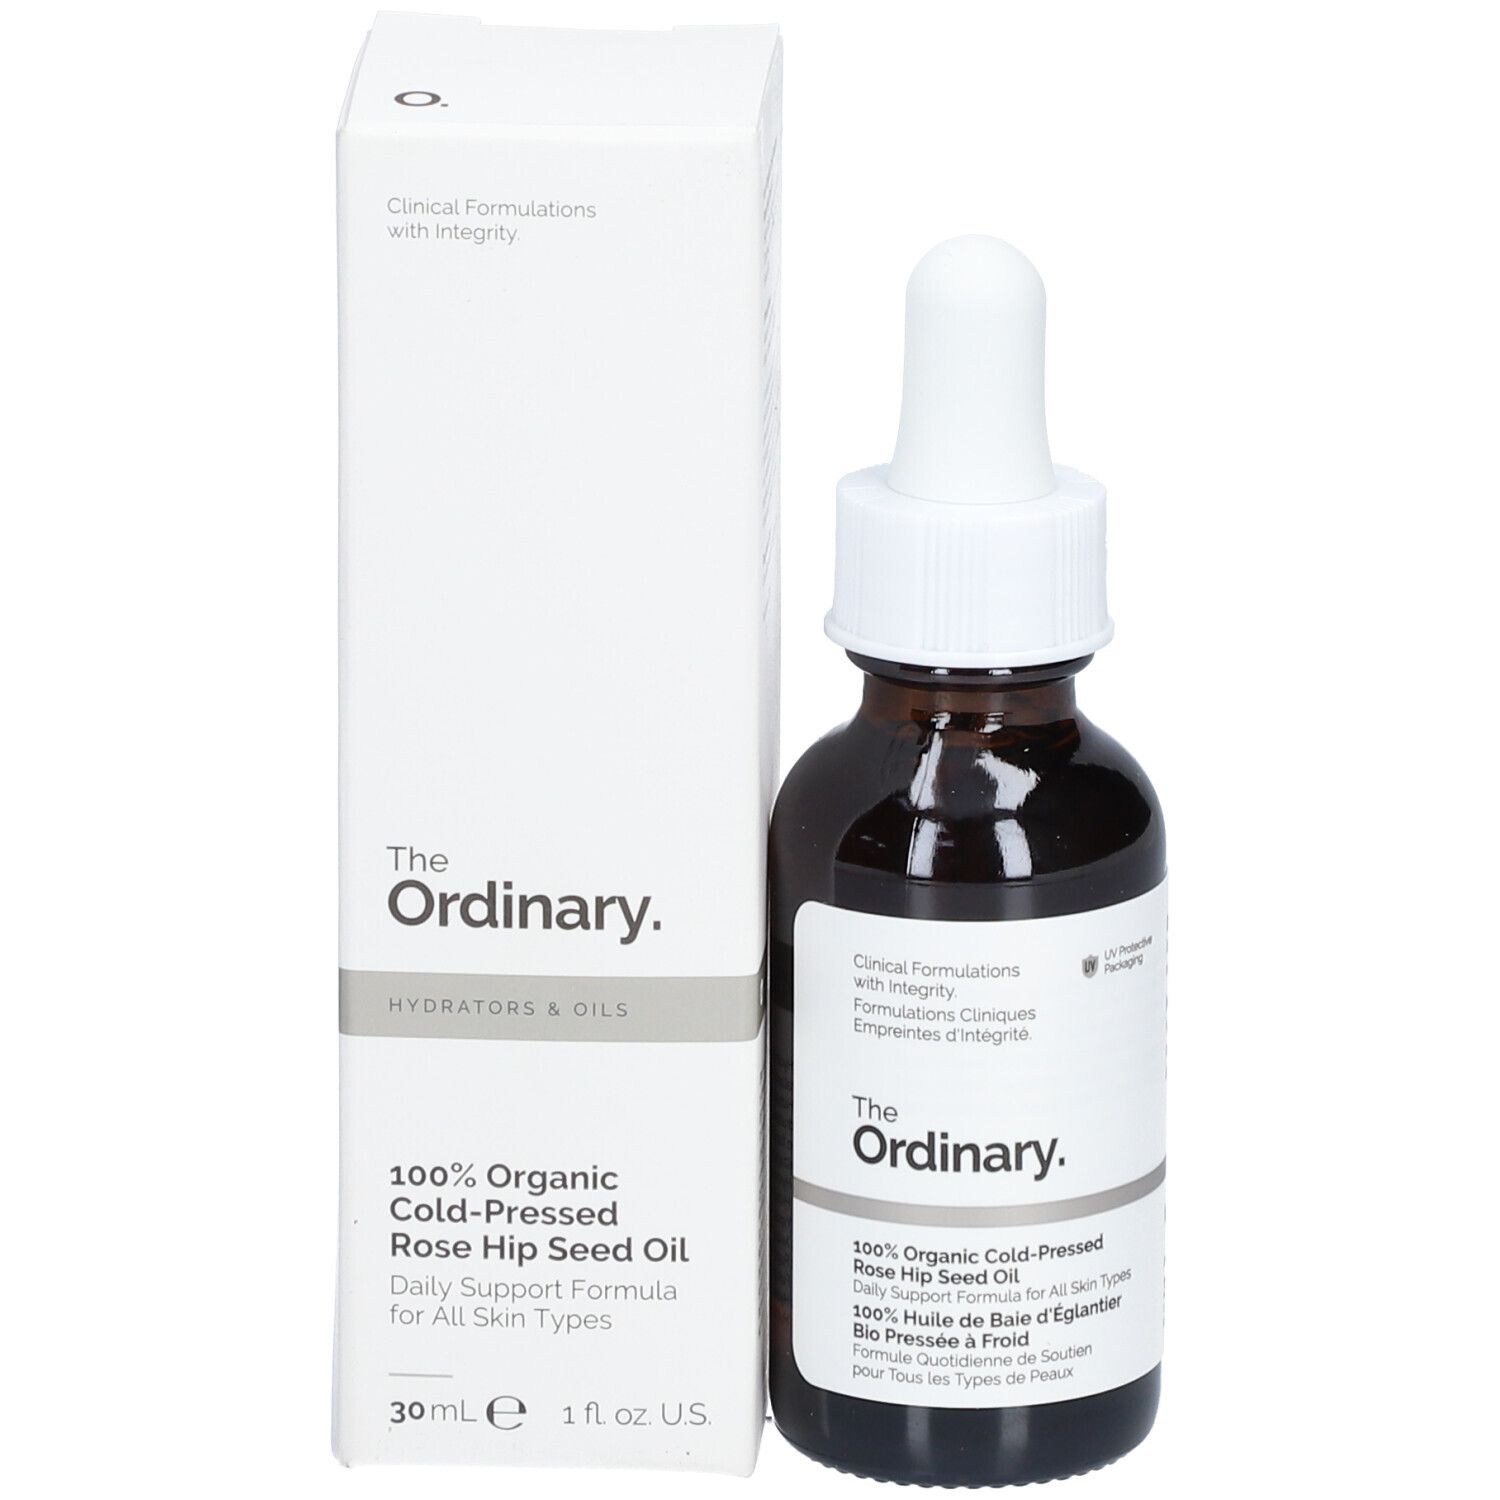 The Ordinary 100 % Organic Cold-Pressed Rose Hip Seed Oil